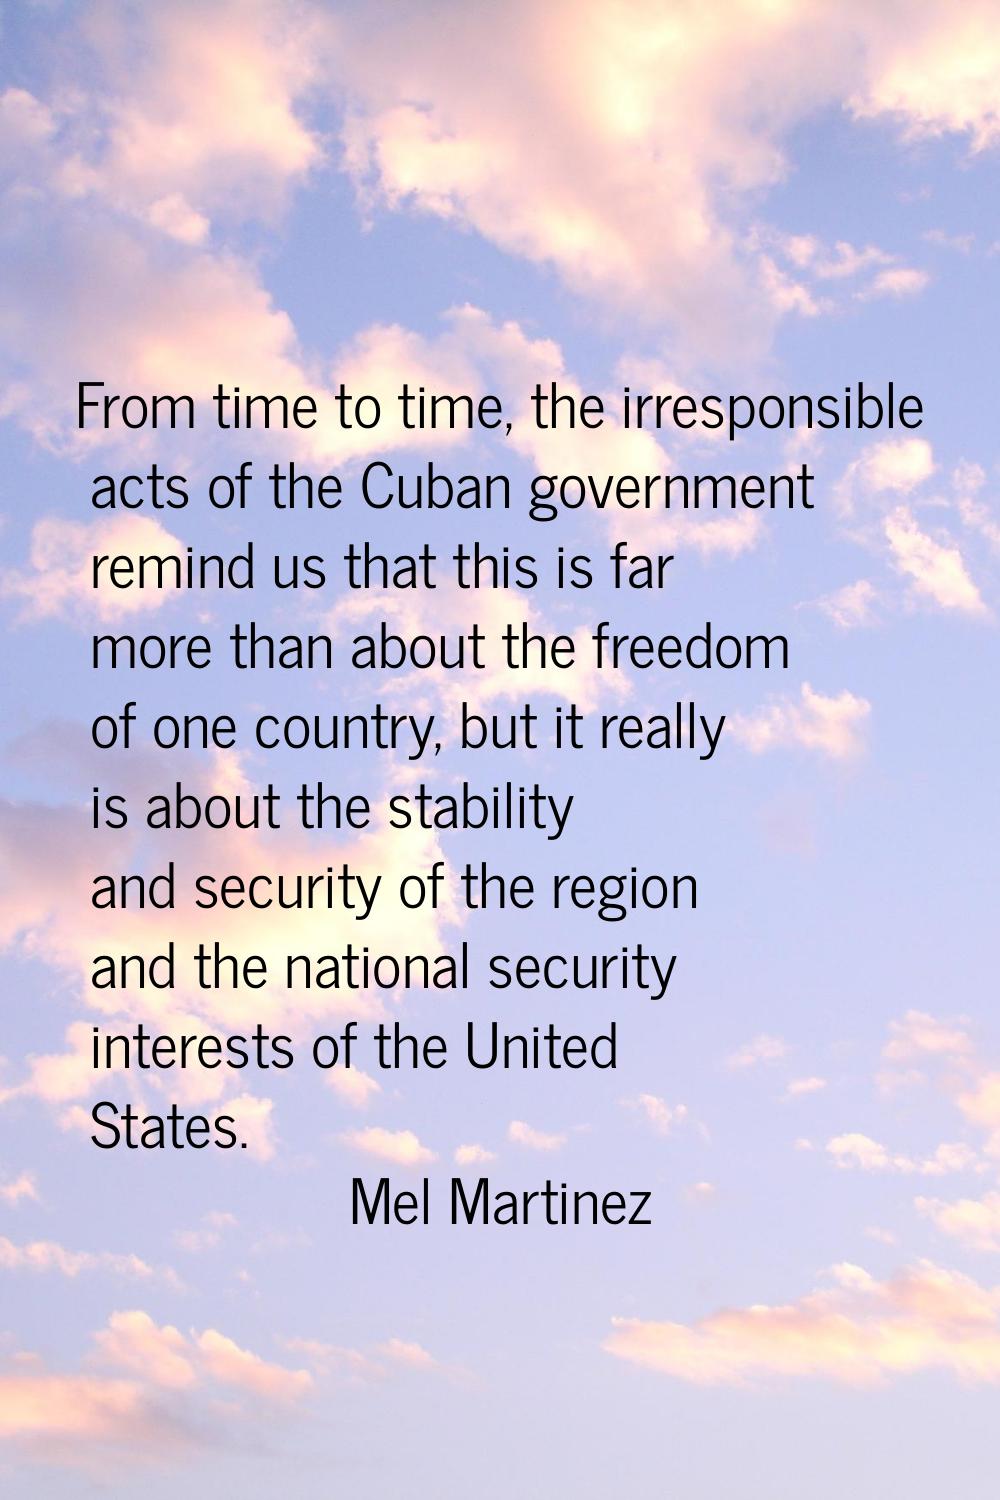 From time to time, the irresponsible acts of the Cuban government remind us that this is far more t